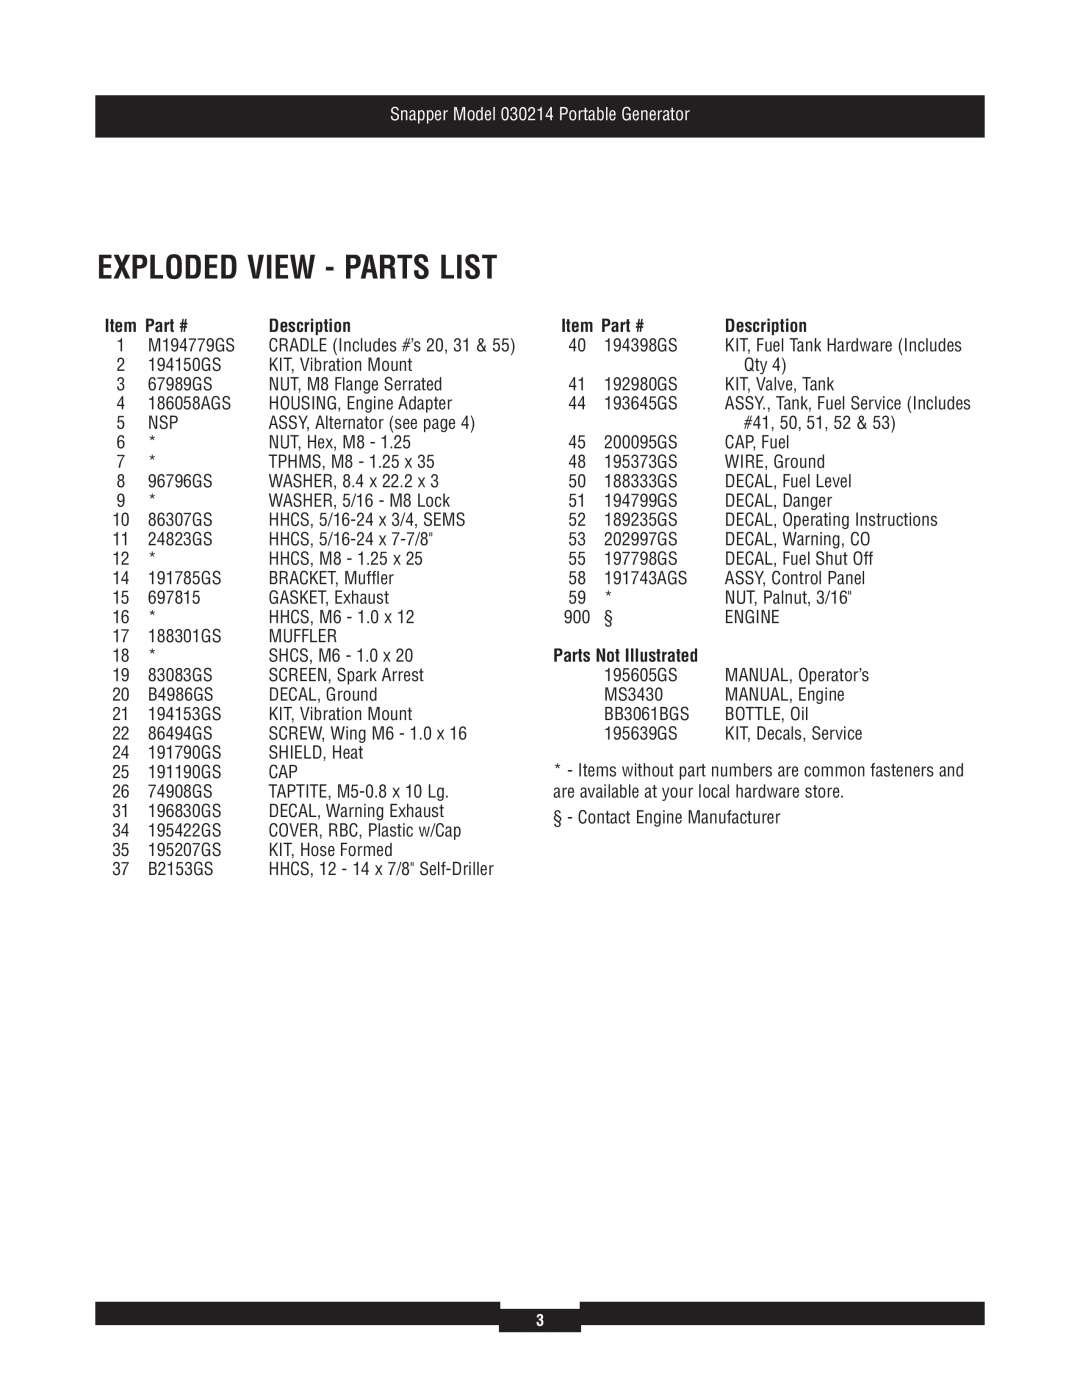 Snapper manual Item Part #, Parts Not Illustrated, Exploded View - Parts List, Snapper Model 030214 Portable Generator 